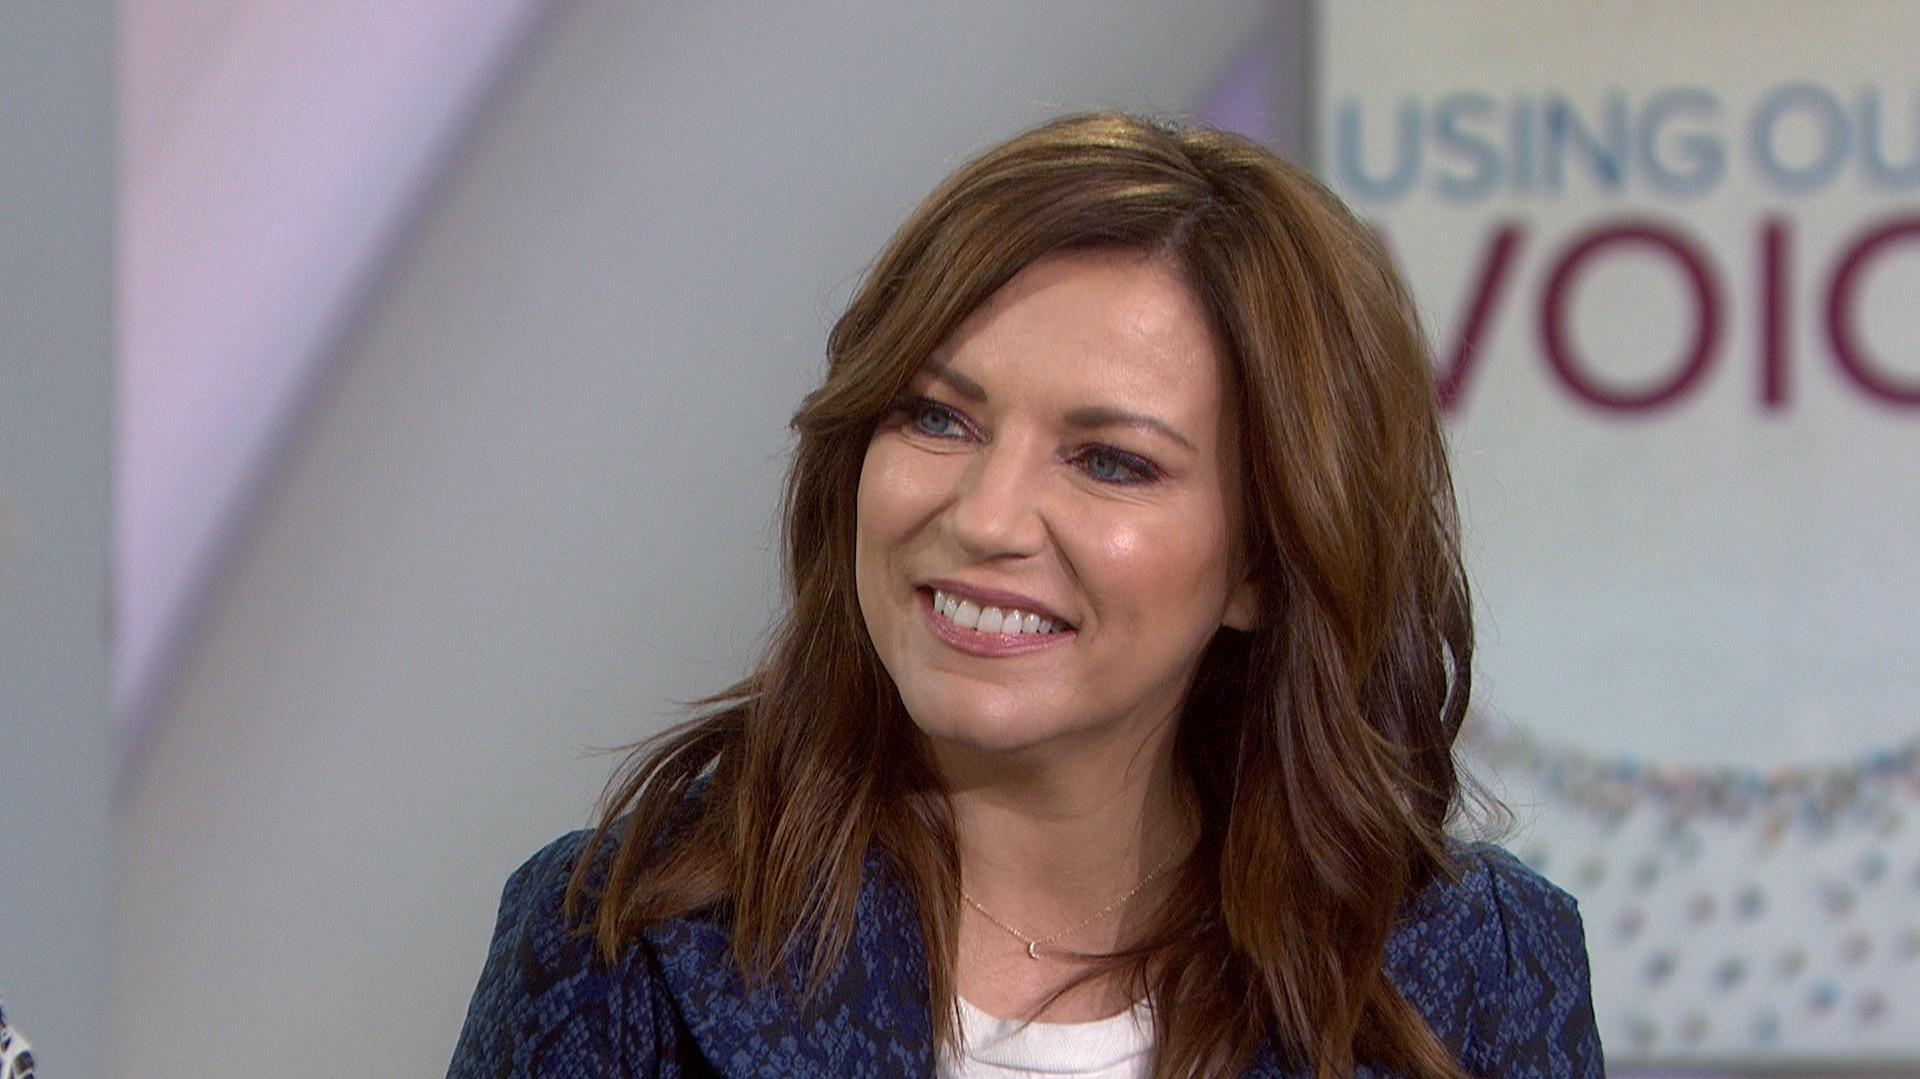 Martina Mcbride On Her Mission To Lift Up Female Musicians